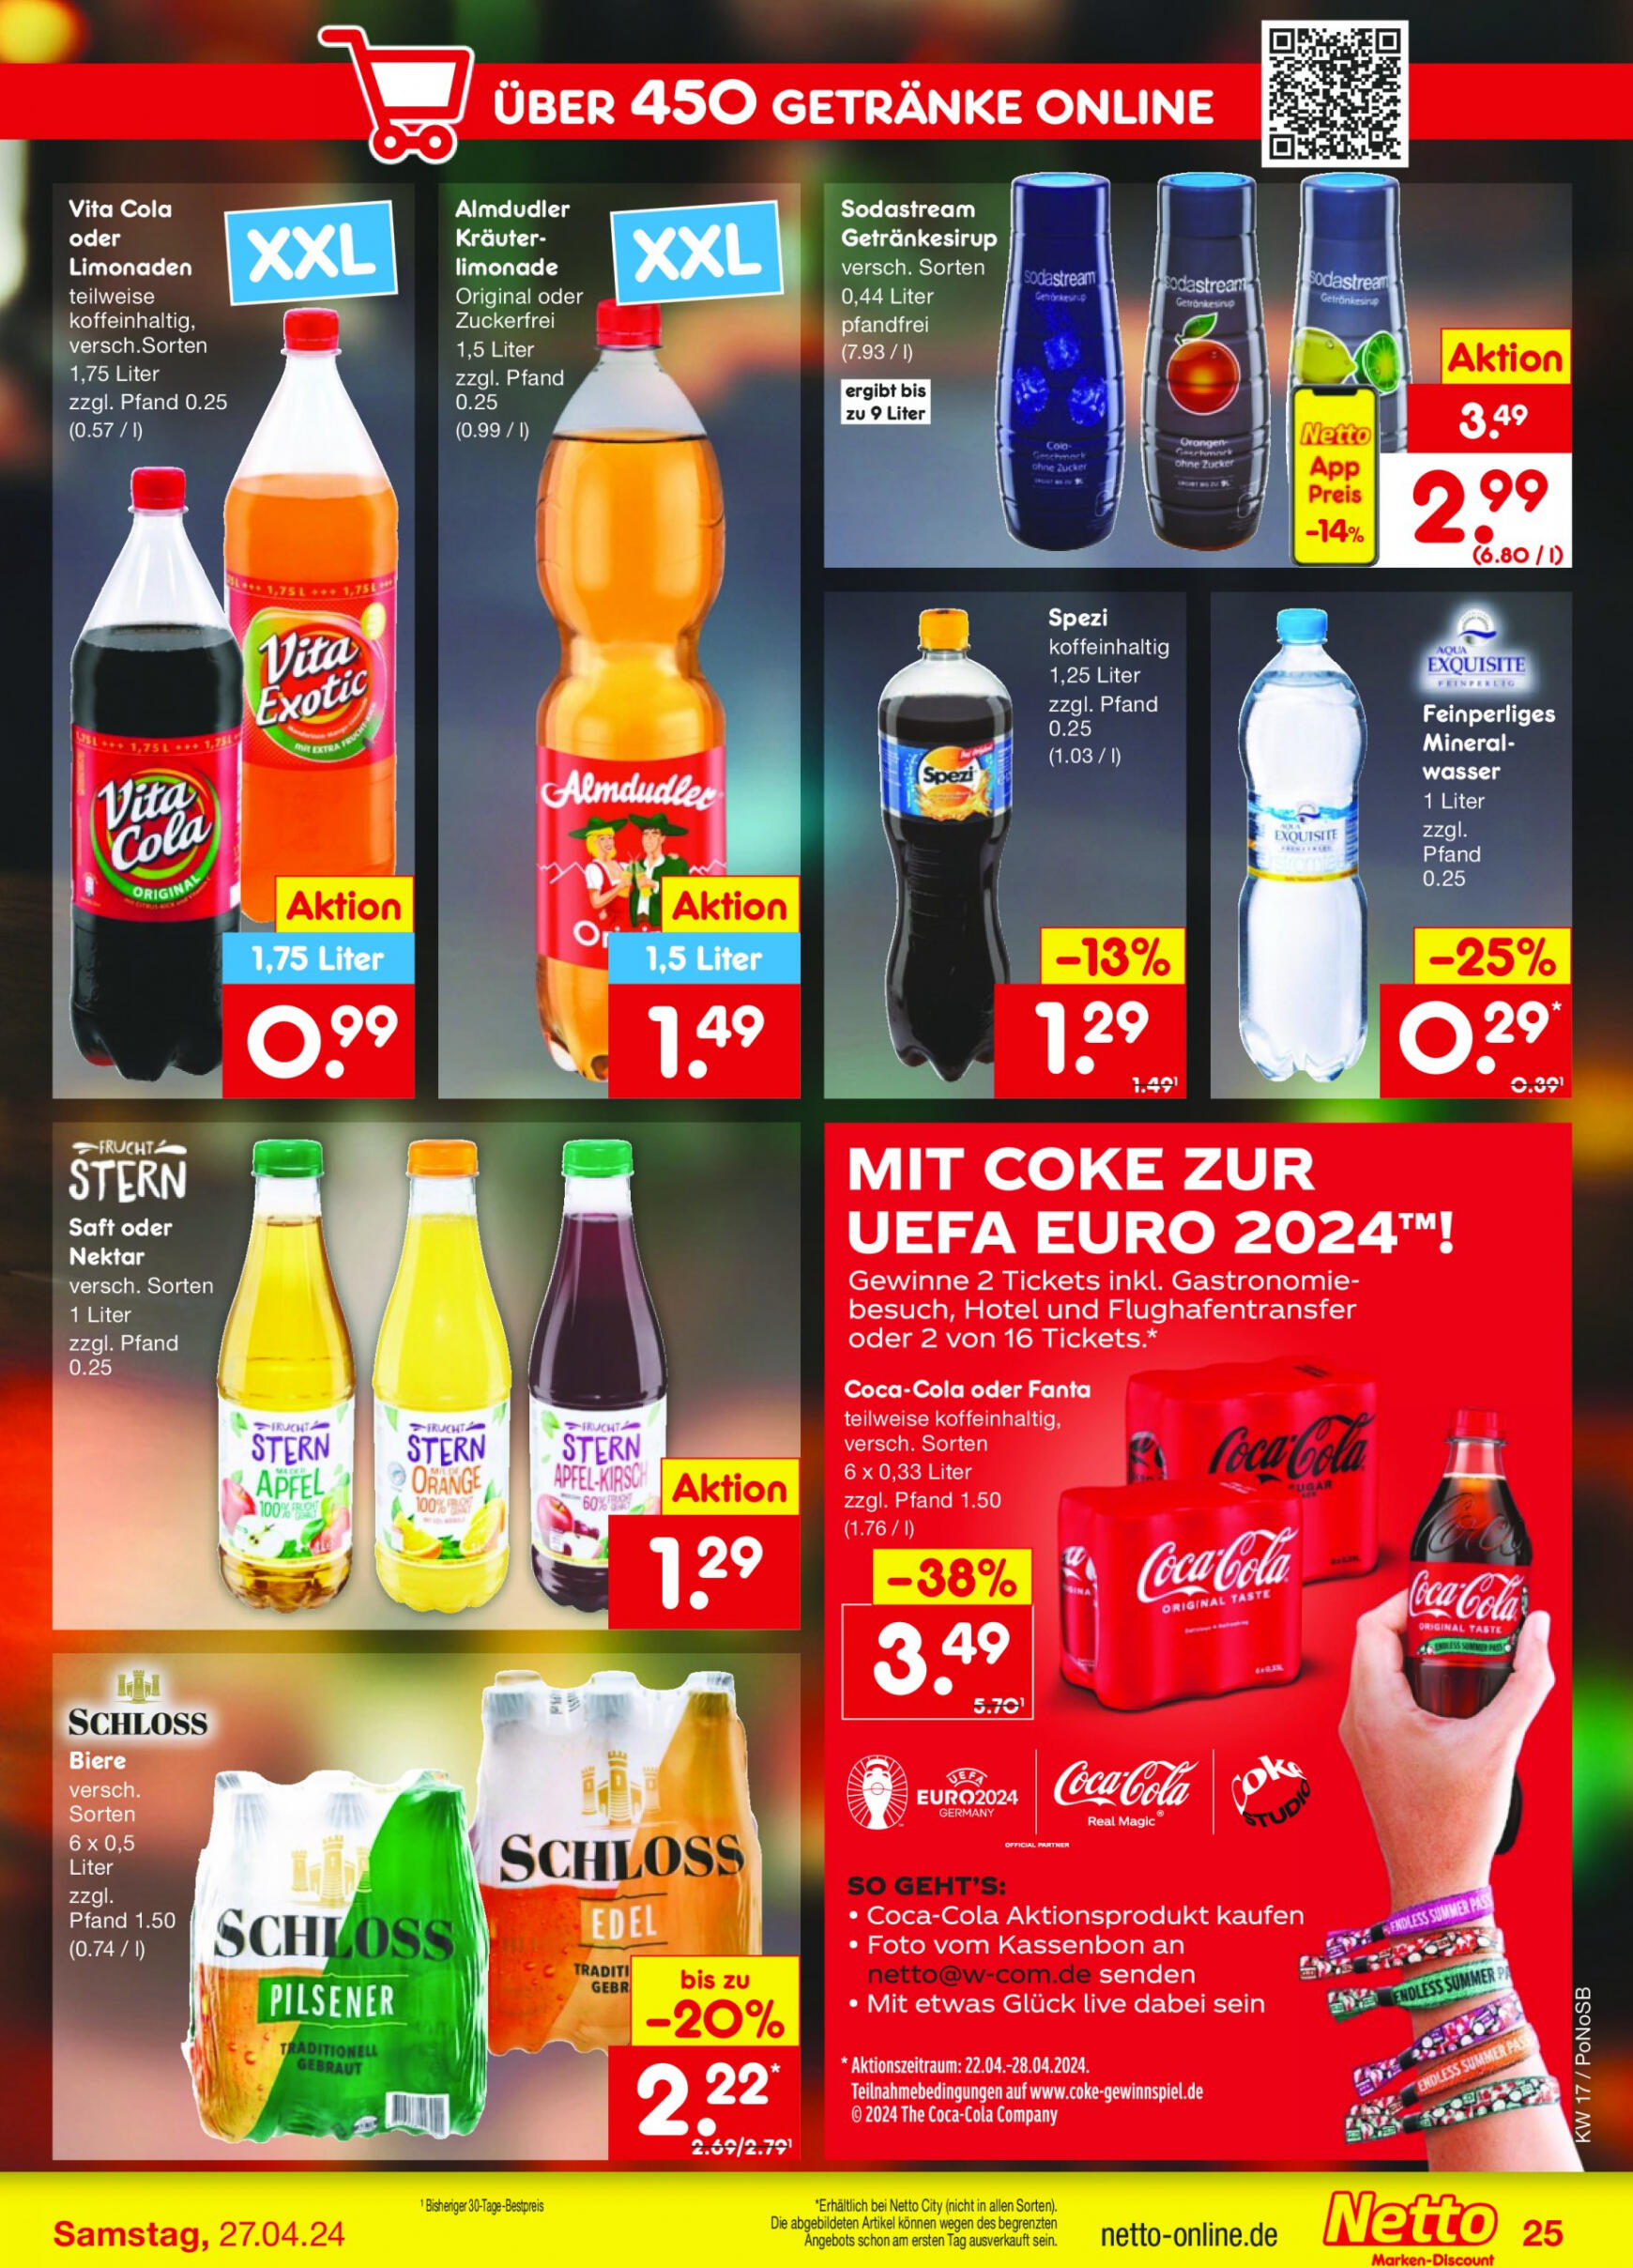 netto - Flyer Netto aktuell 22.04. - 27.04. - page: 27